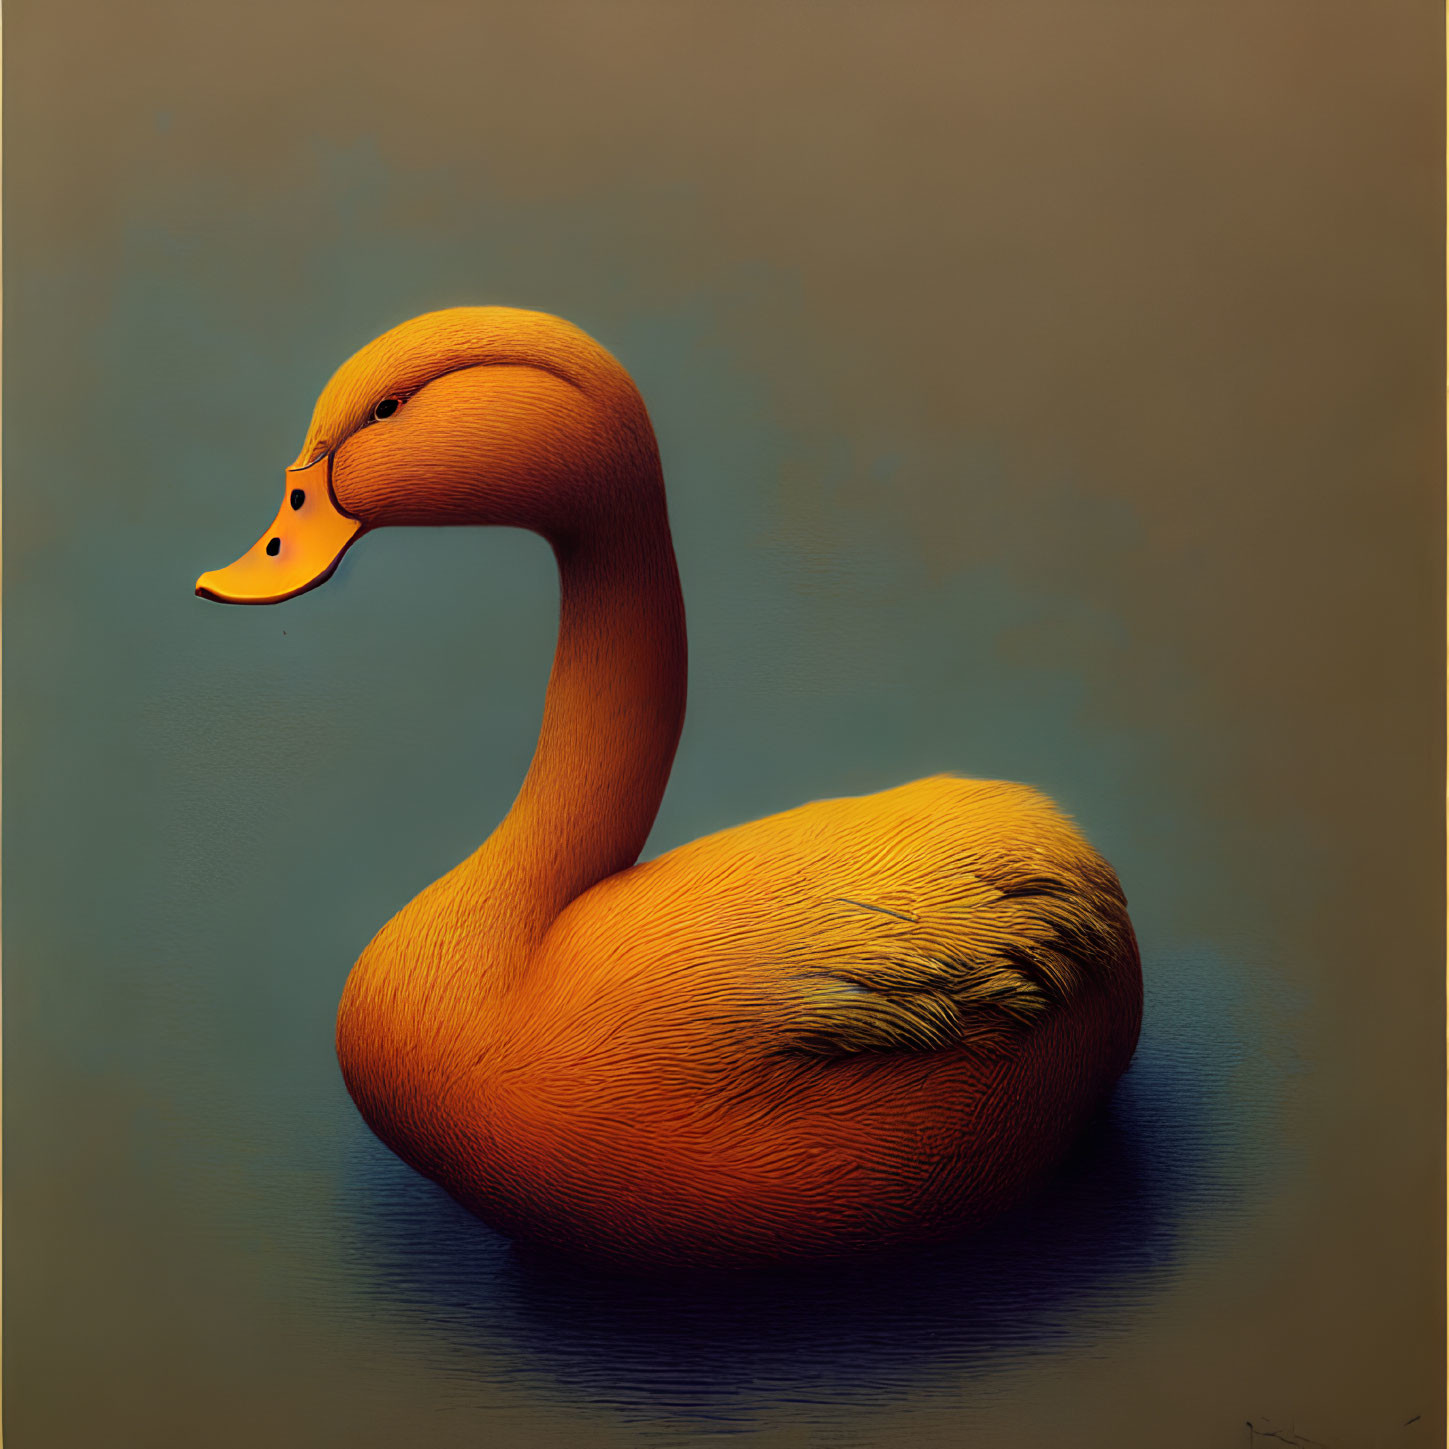 Whimsical duck illustration with elongated neck and orange plumage